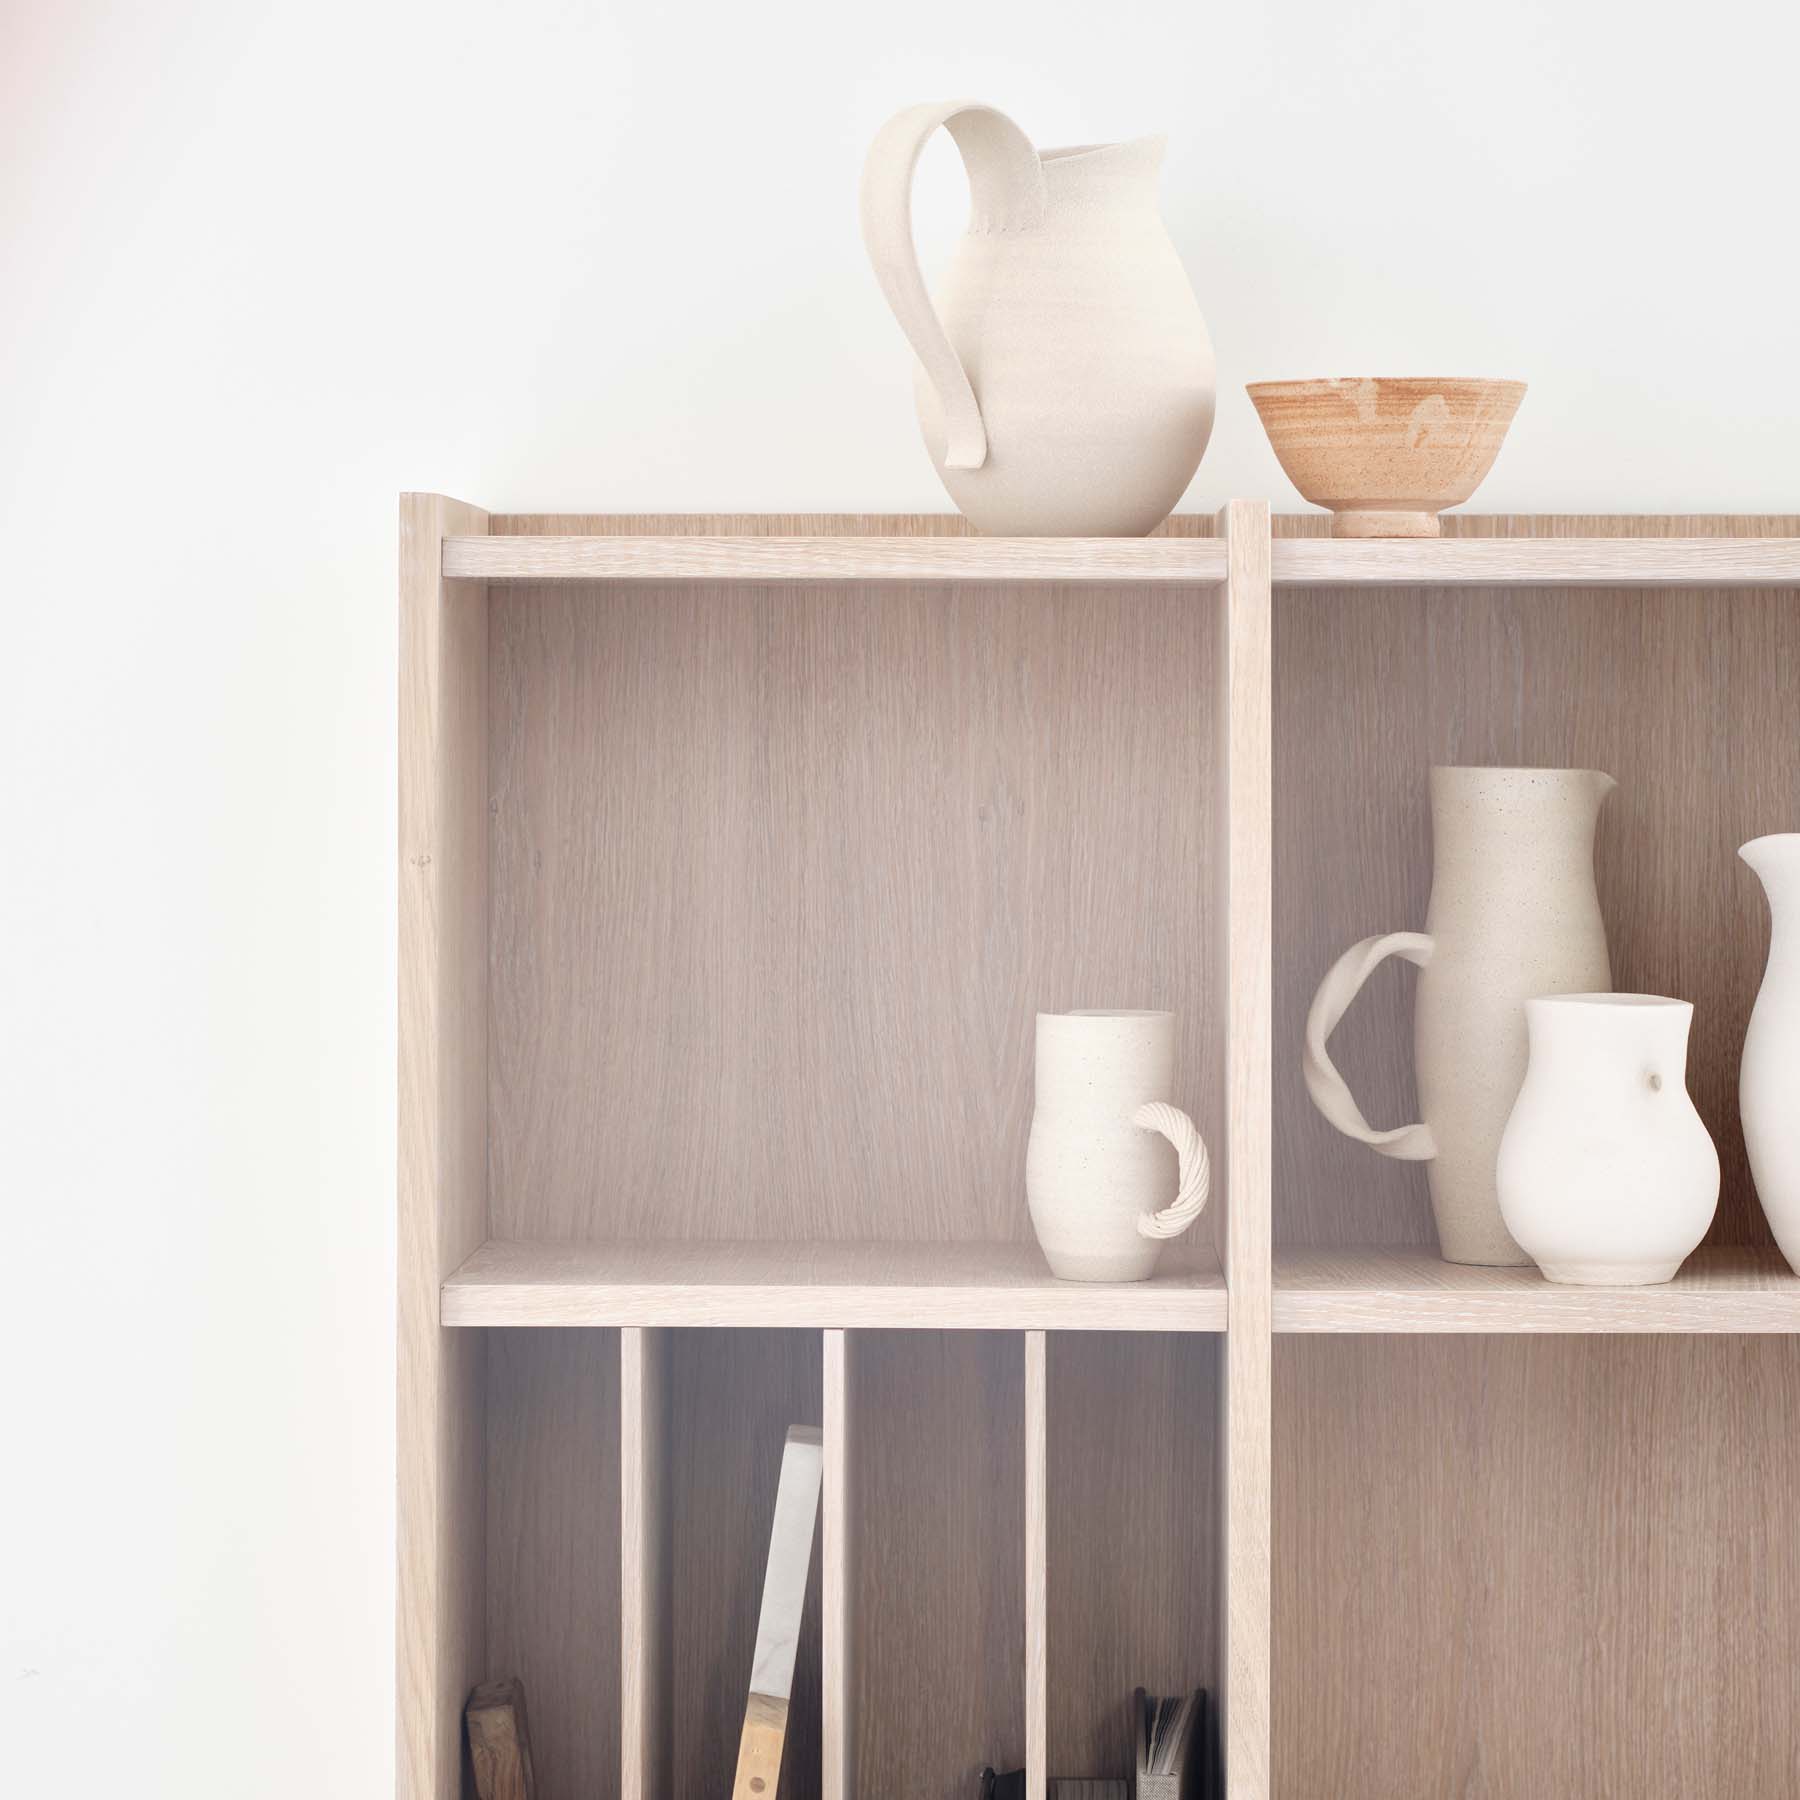 Shelving made in natural Oak veneer finish, with a touch of white pigmented oilwax.